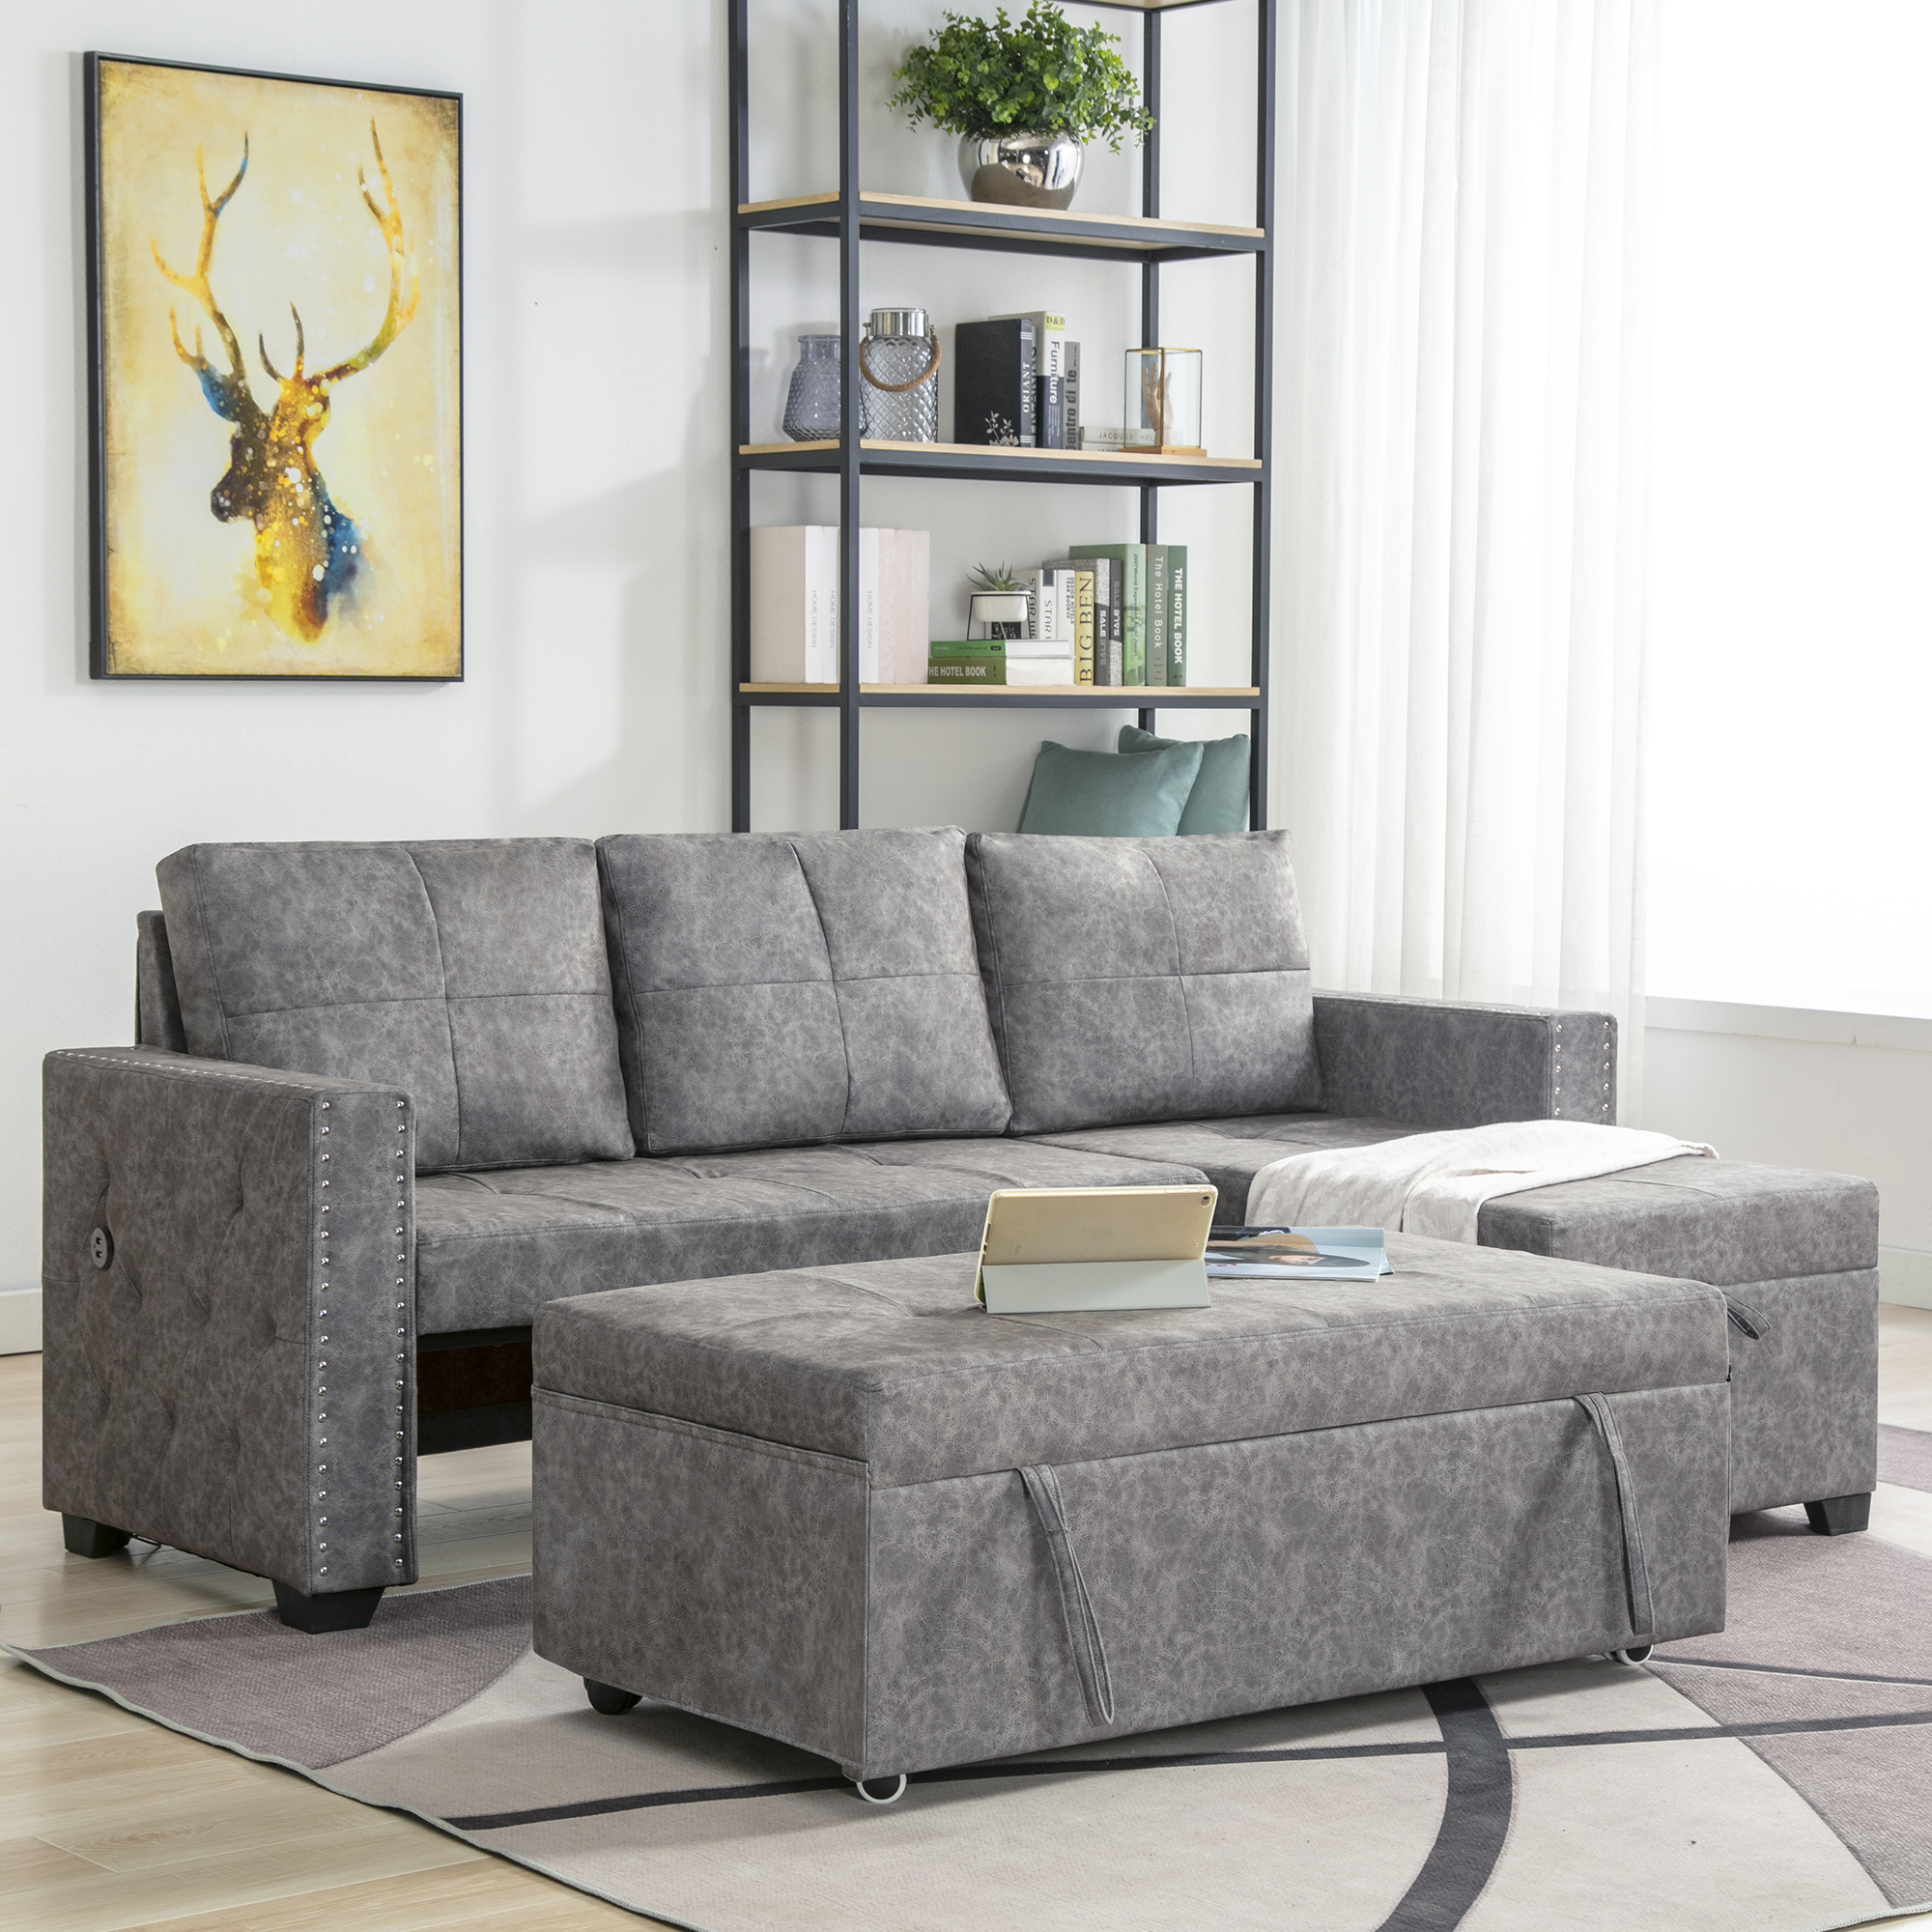 84" Pull-Out L-shaped Storage Sofa Bed - GS000052AAE